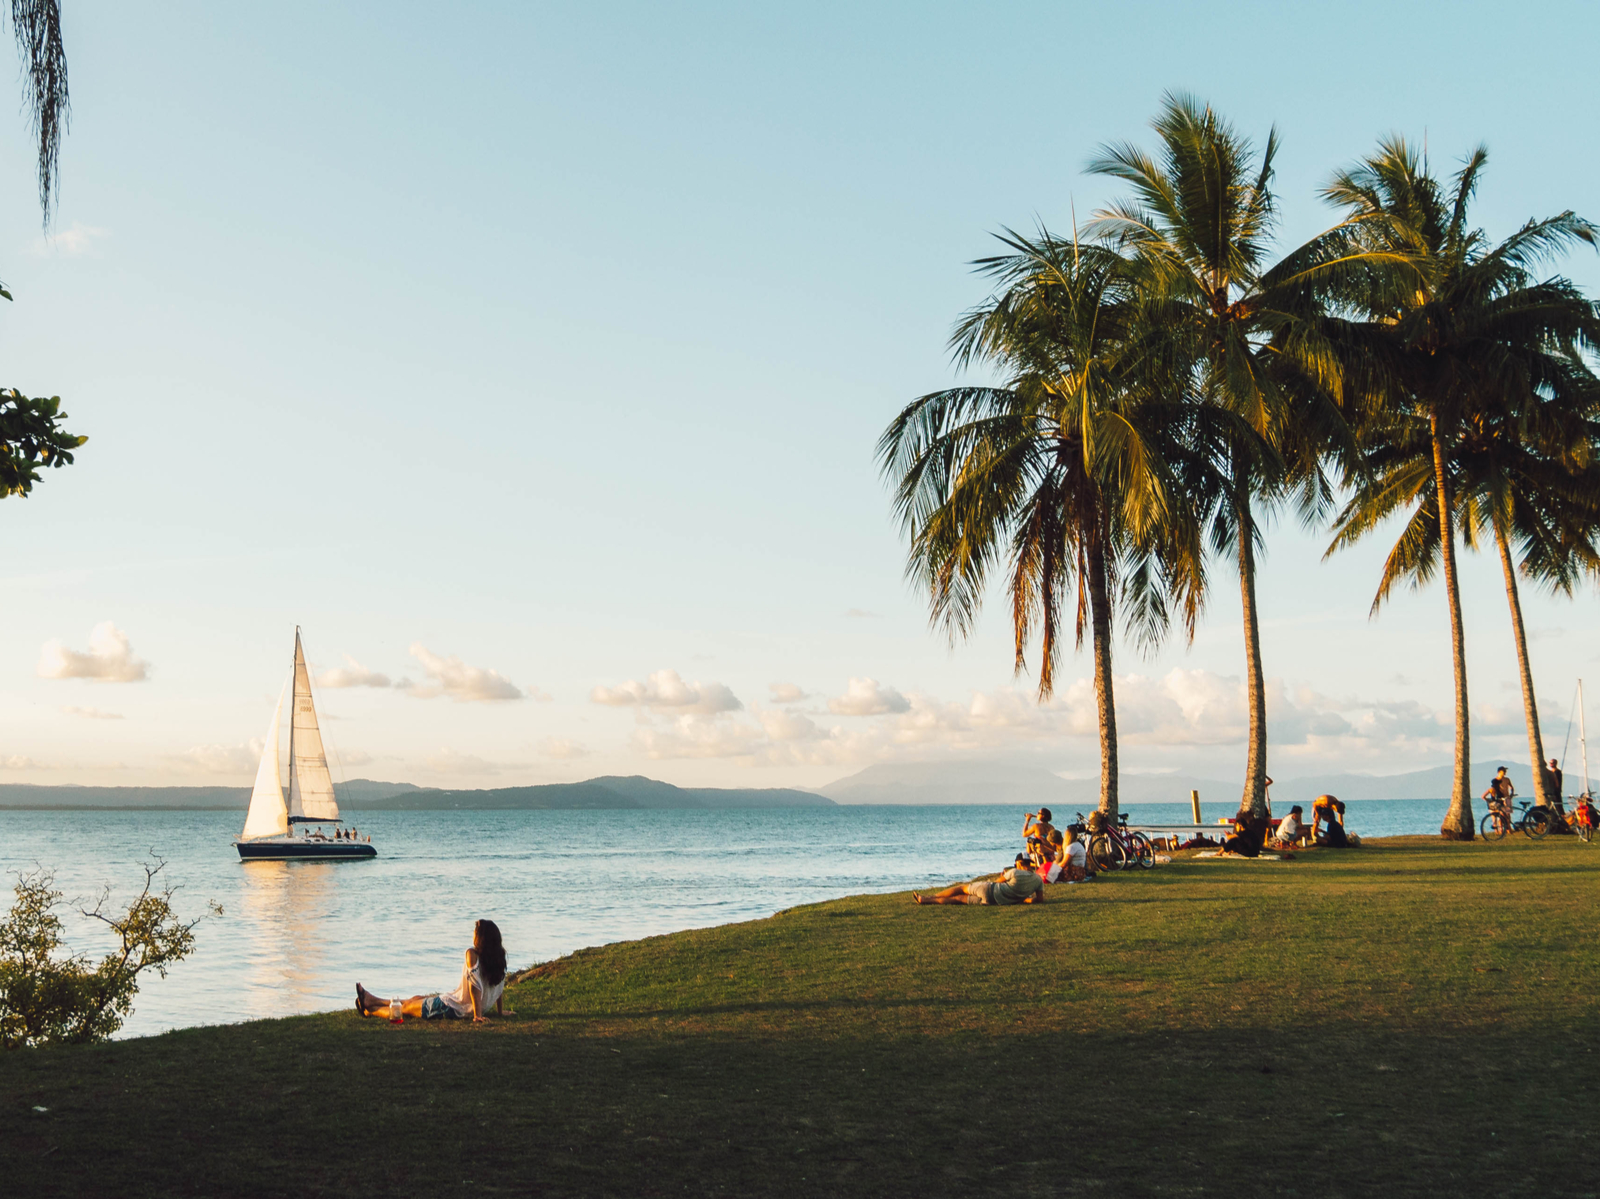 Gorgeous beach in Port Douglas pictured during the best time to visit with a sailboat in the background